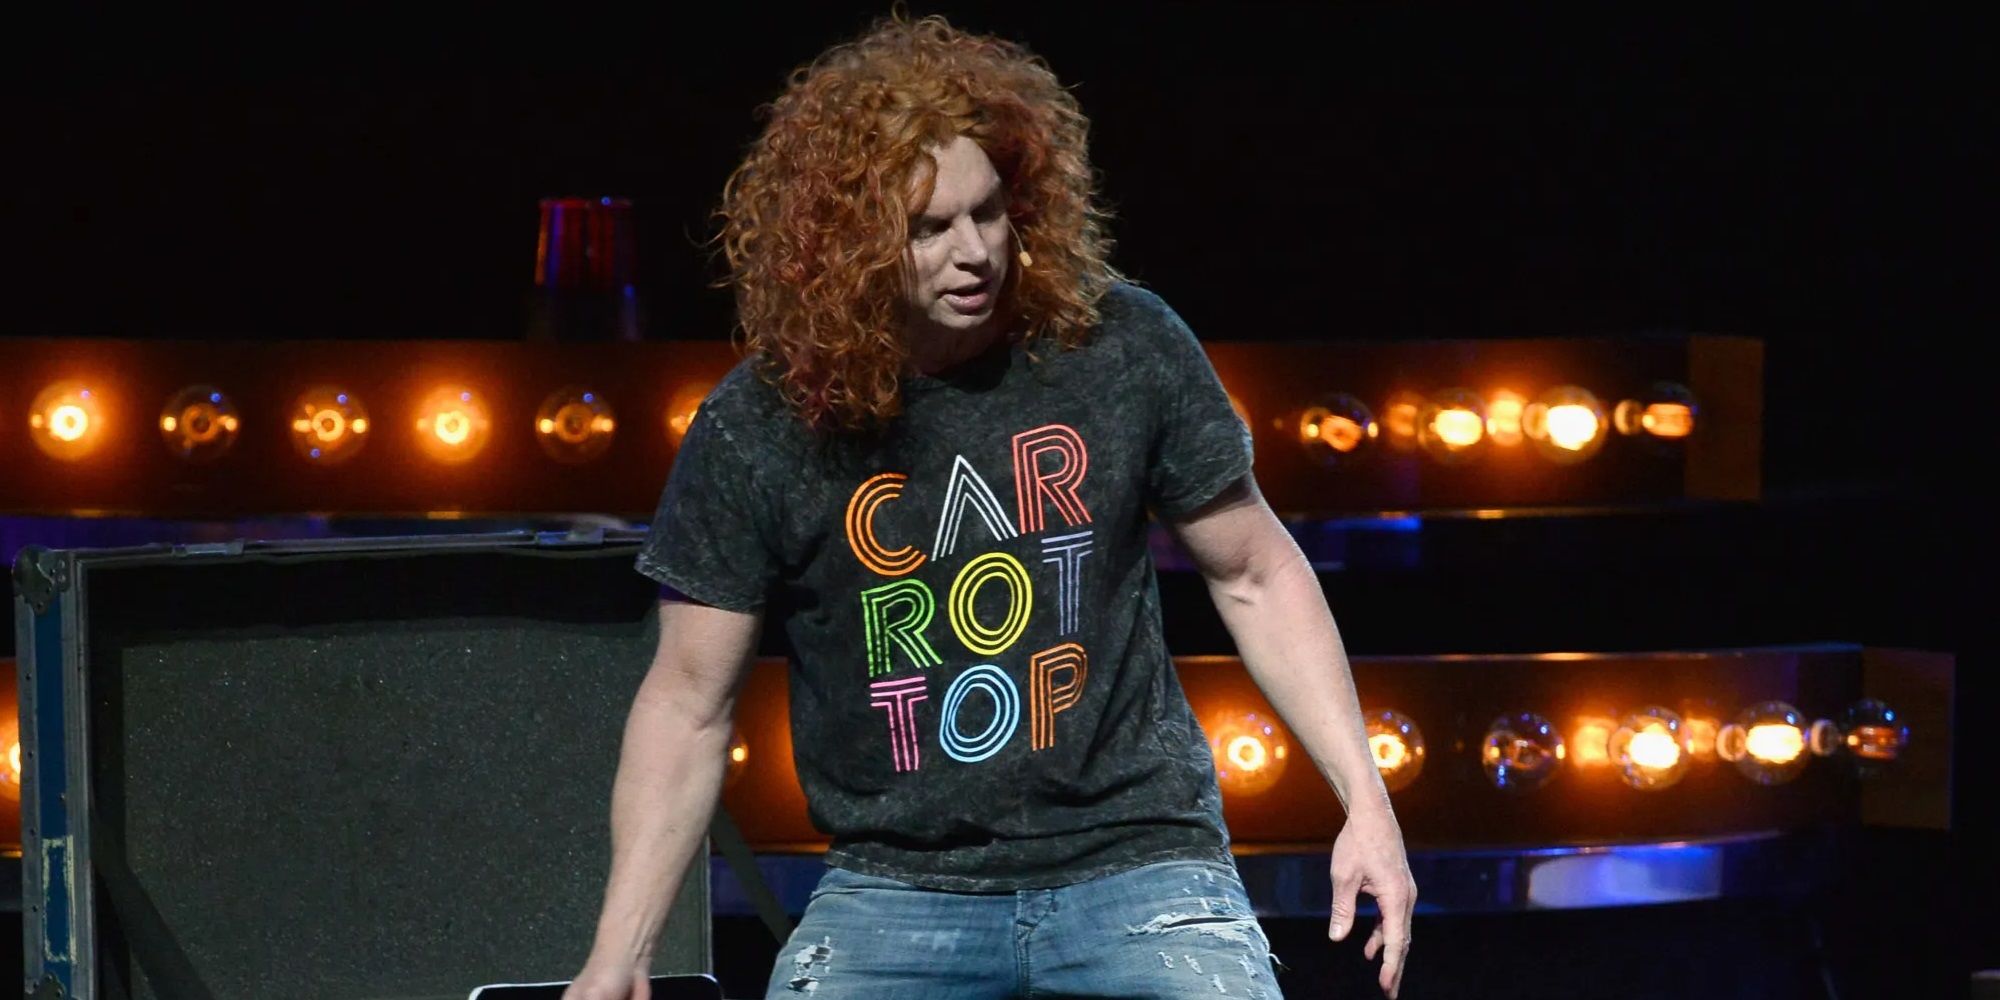 Carrot Top performing on stage